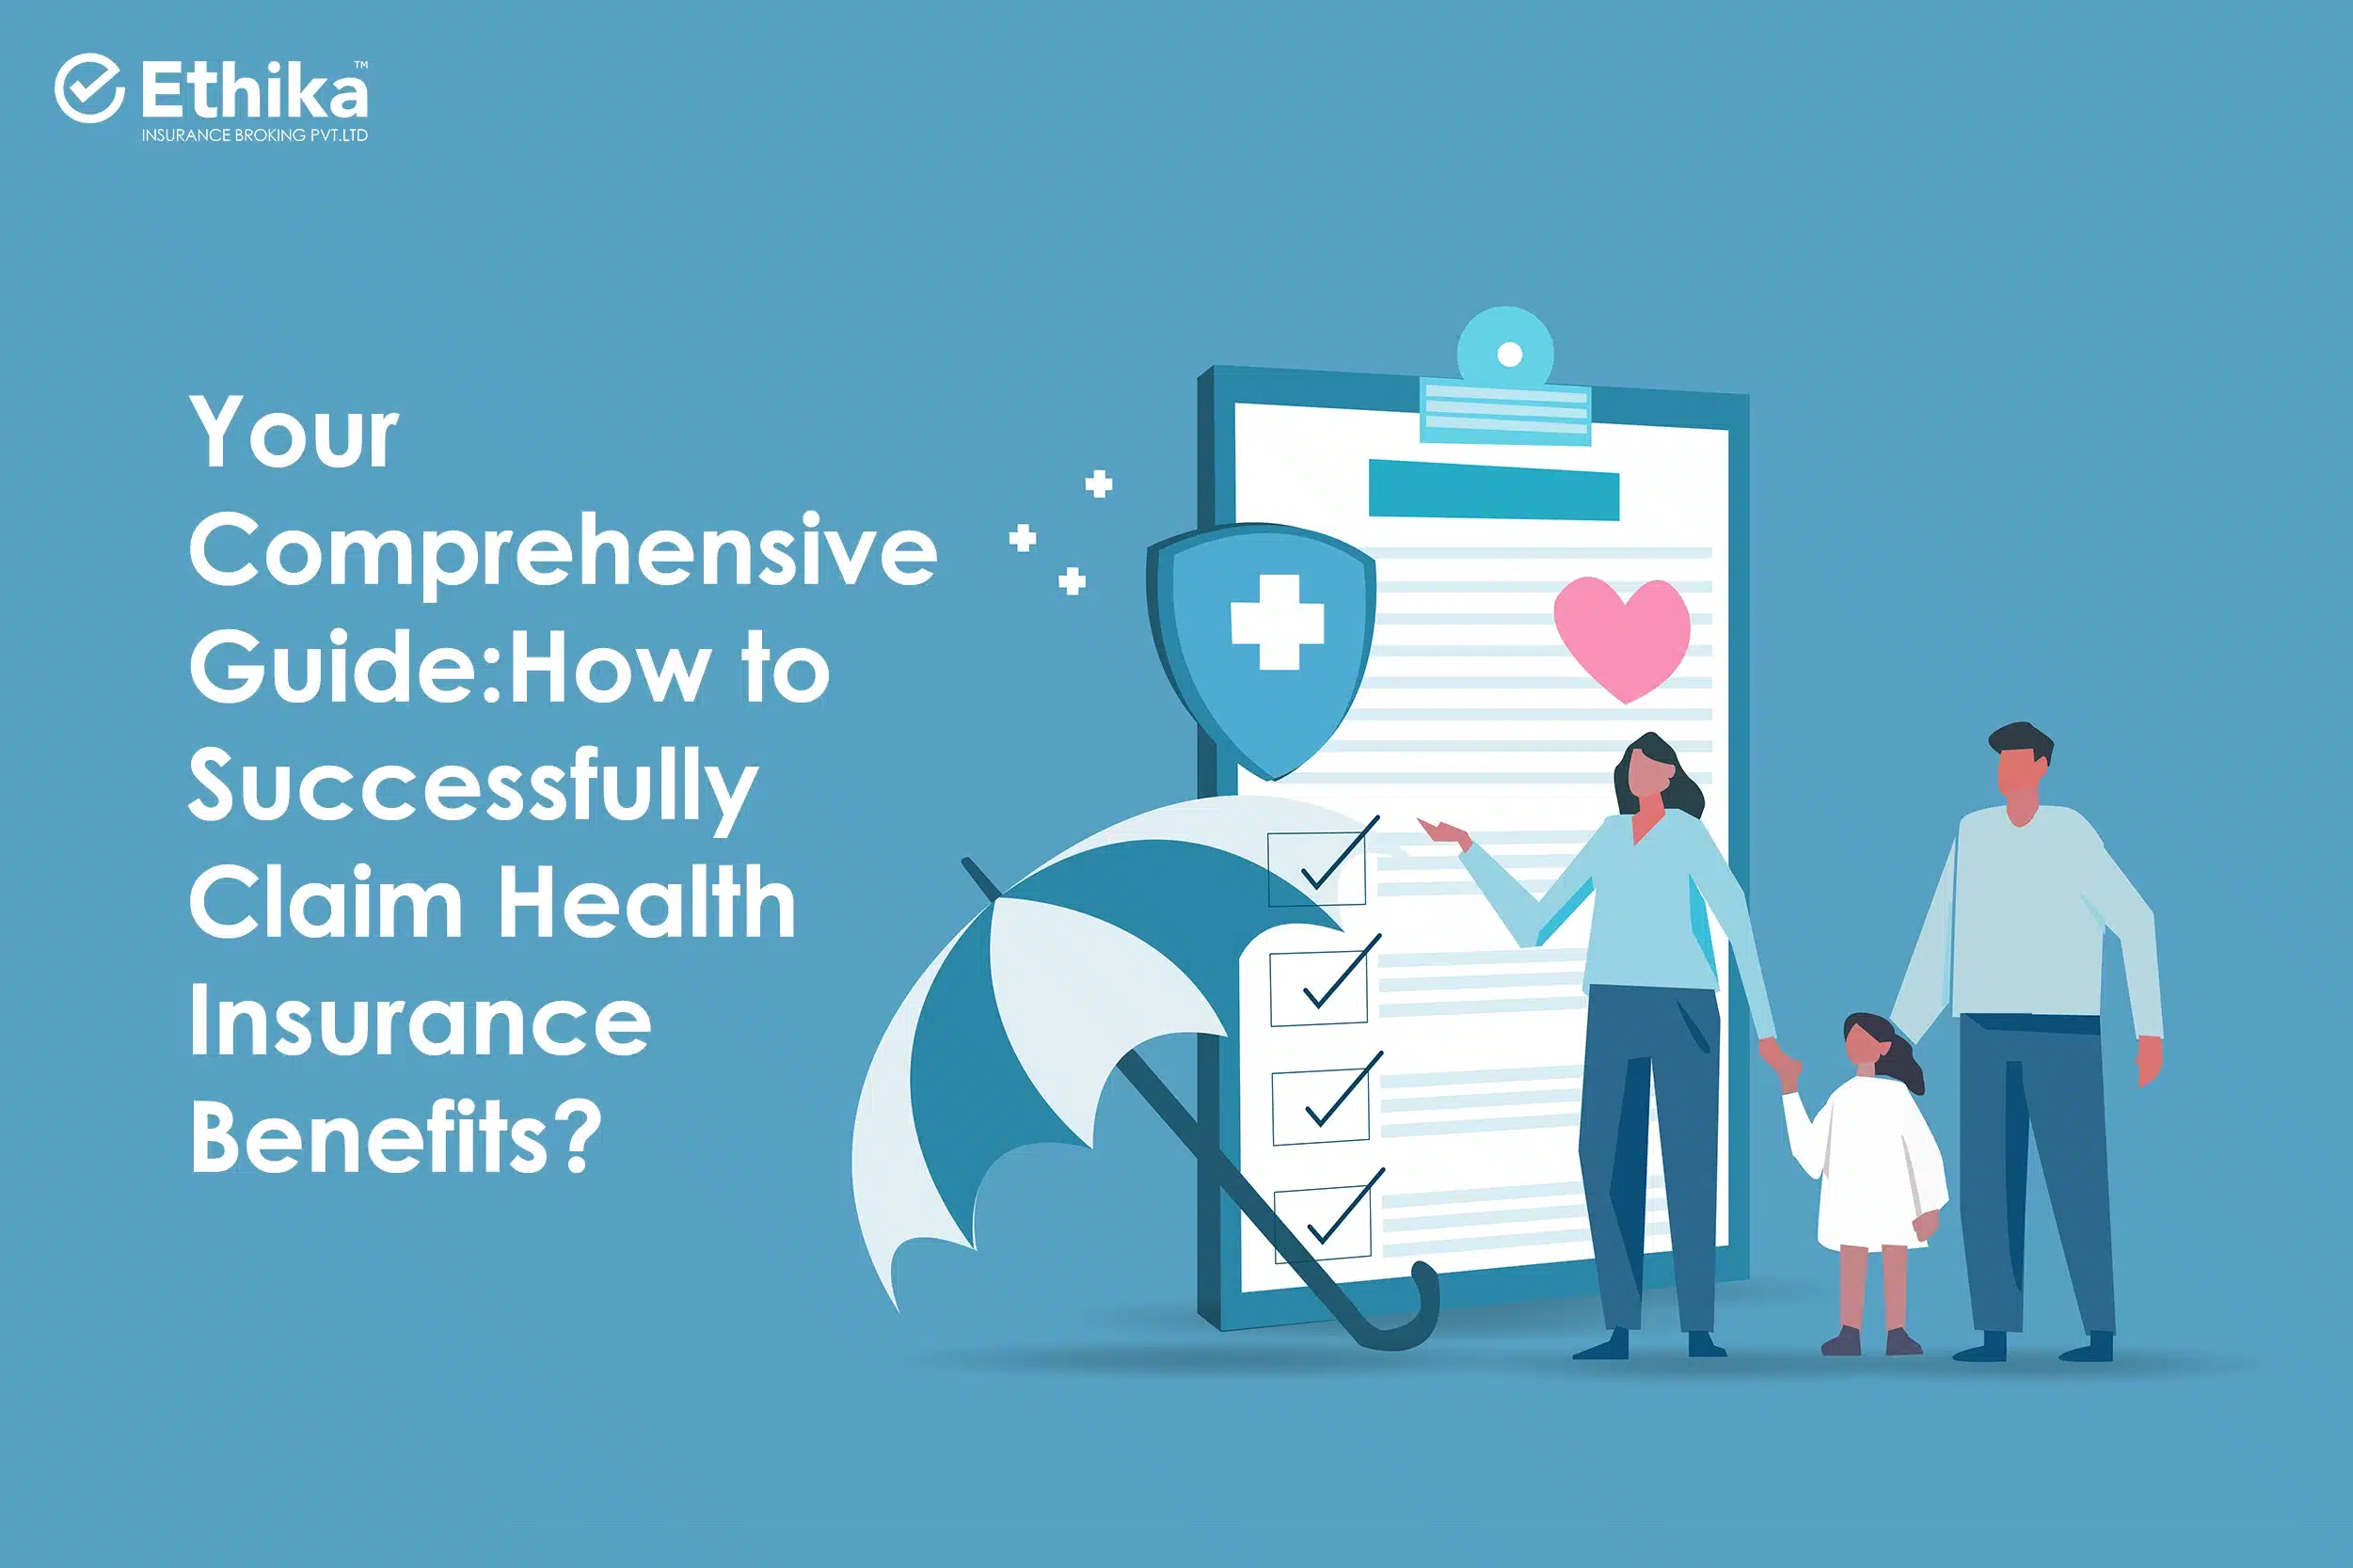 Your Comprehensive Guide: How to Successfully Claim Health Insurance Benefits?